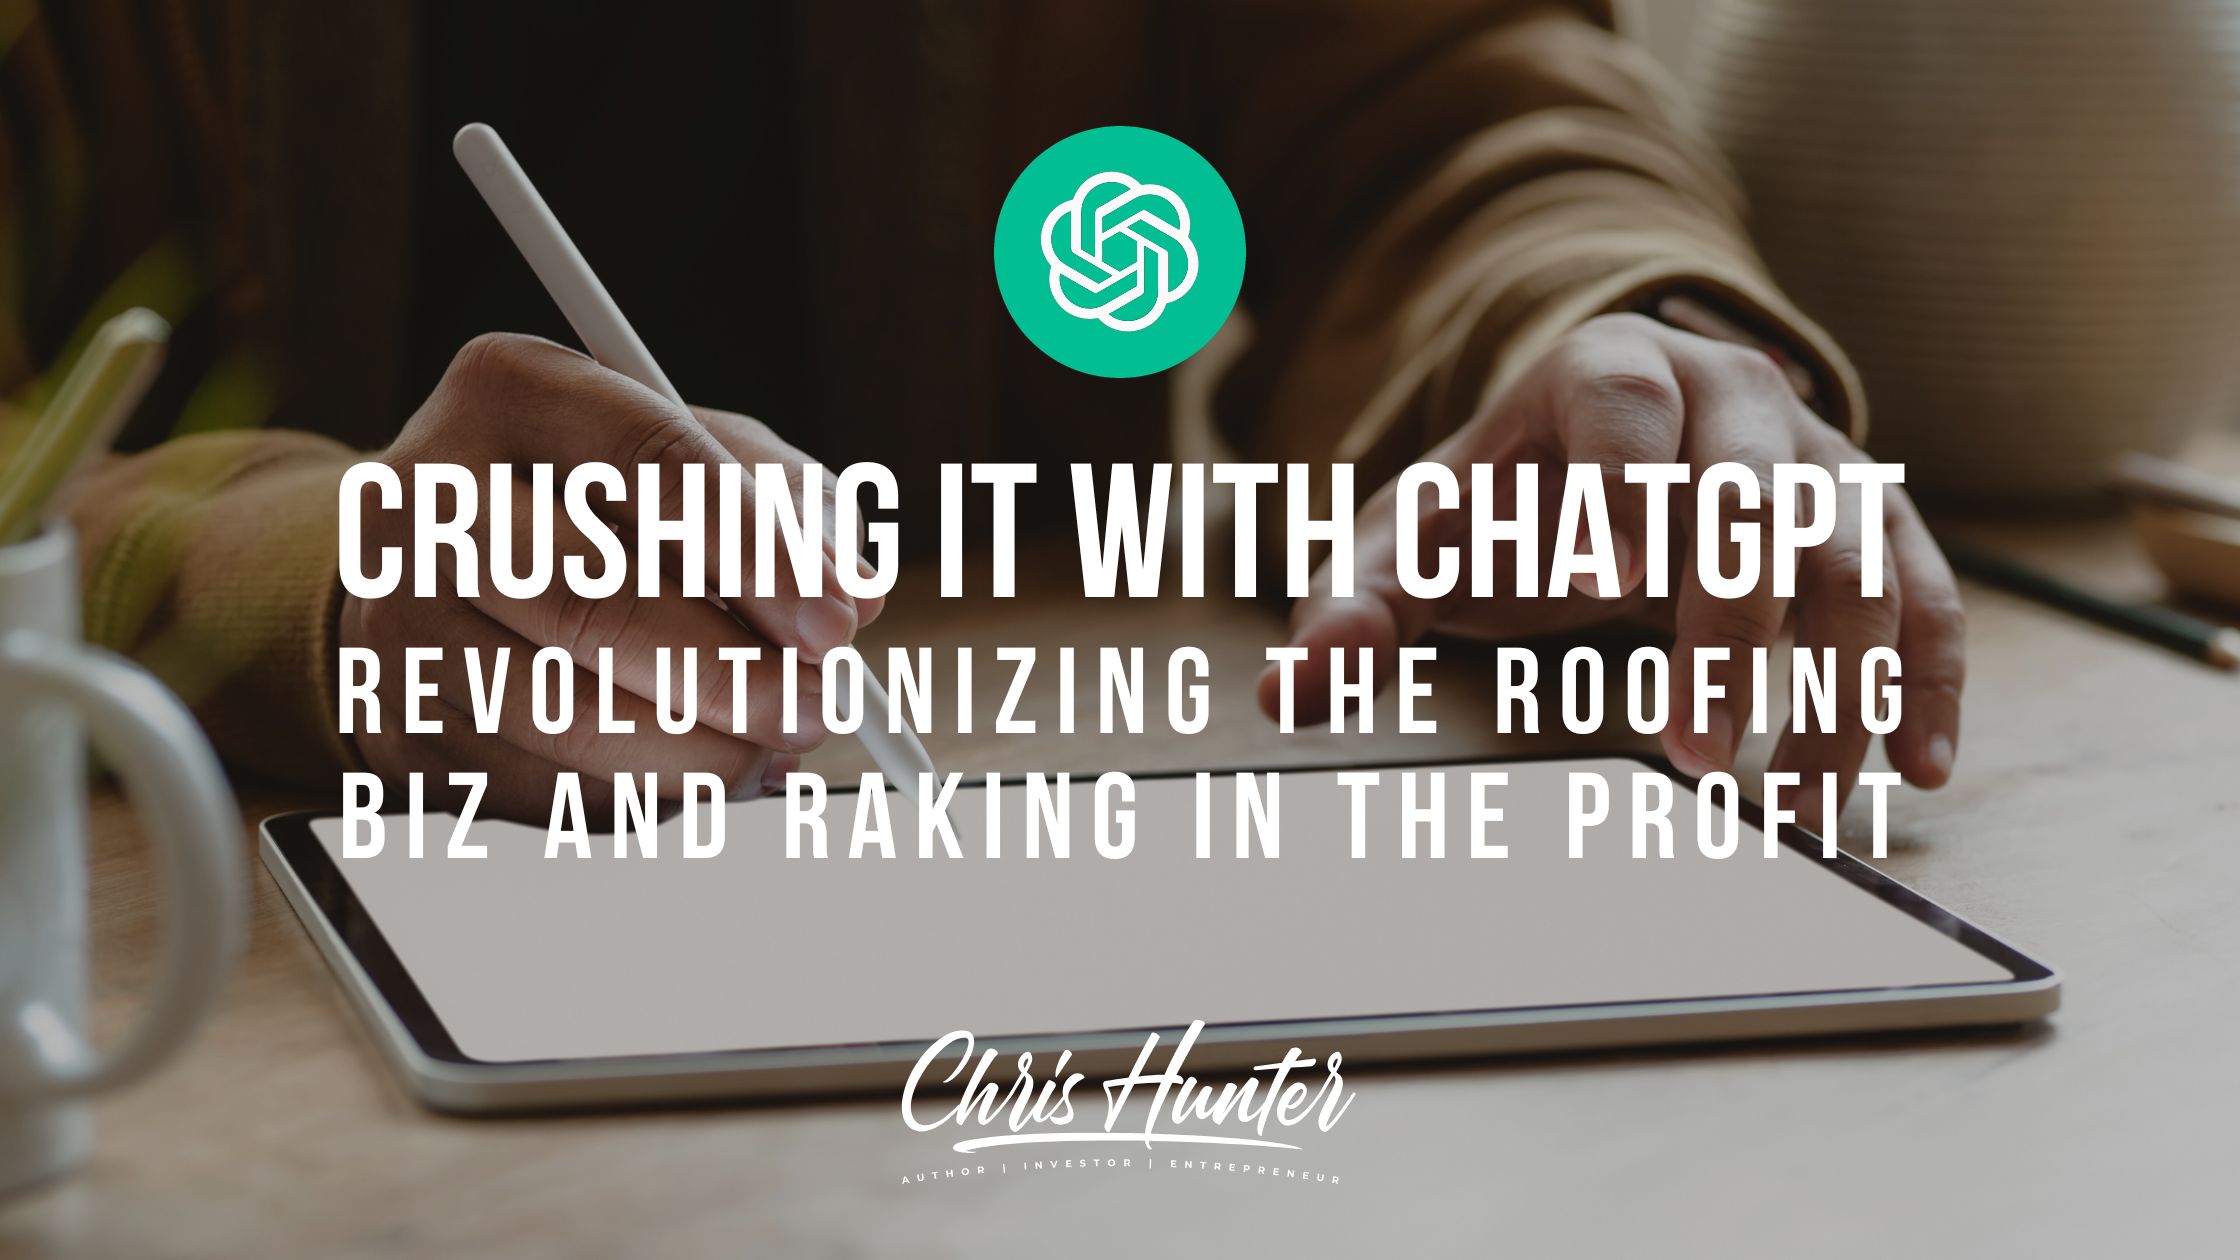 Crushing It with ChatGPT: Revolutionizing the Roofing Biz and Raking in the Profits